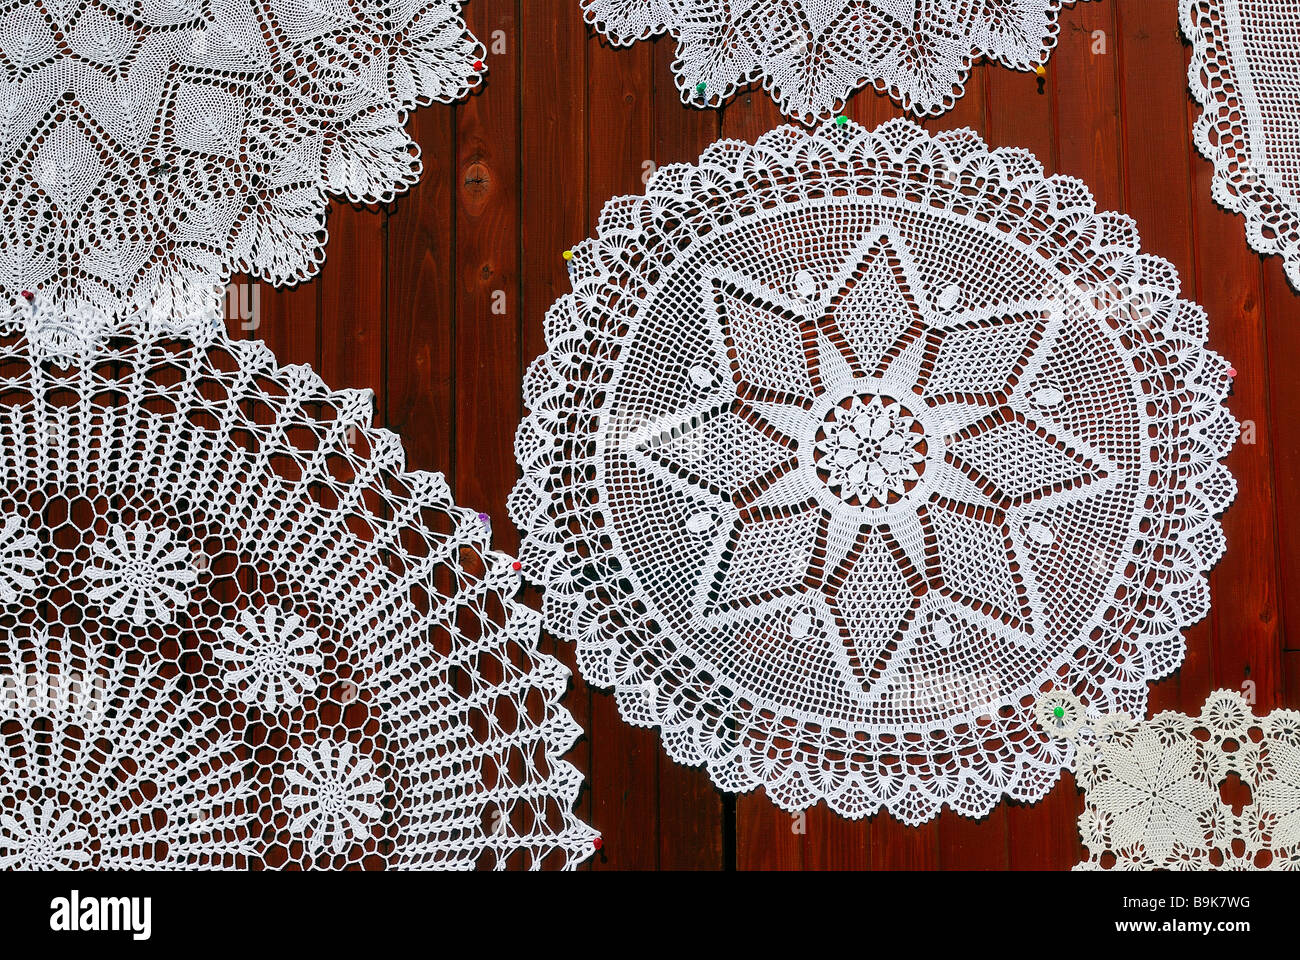 Bulgaria, typical lace Stock Photo